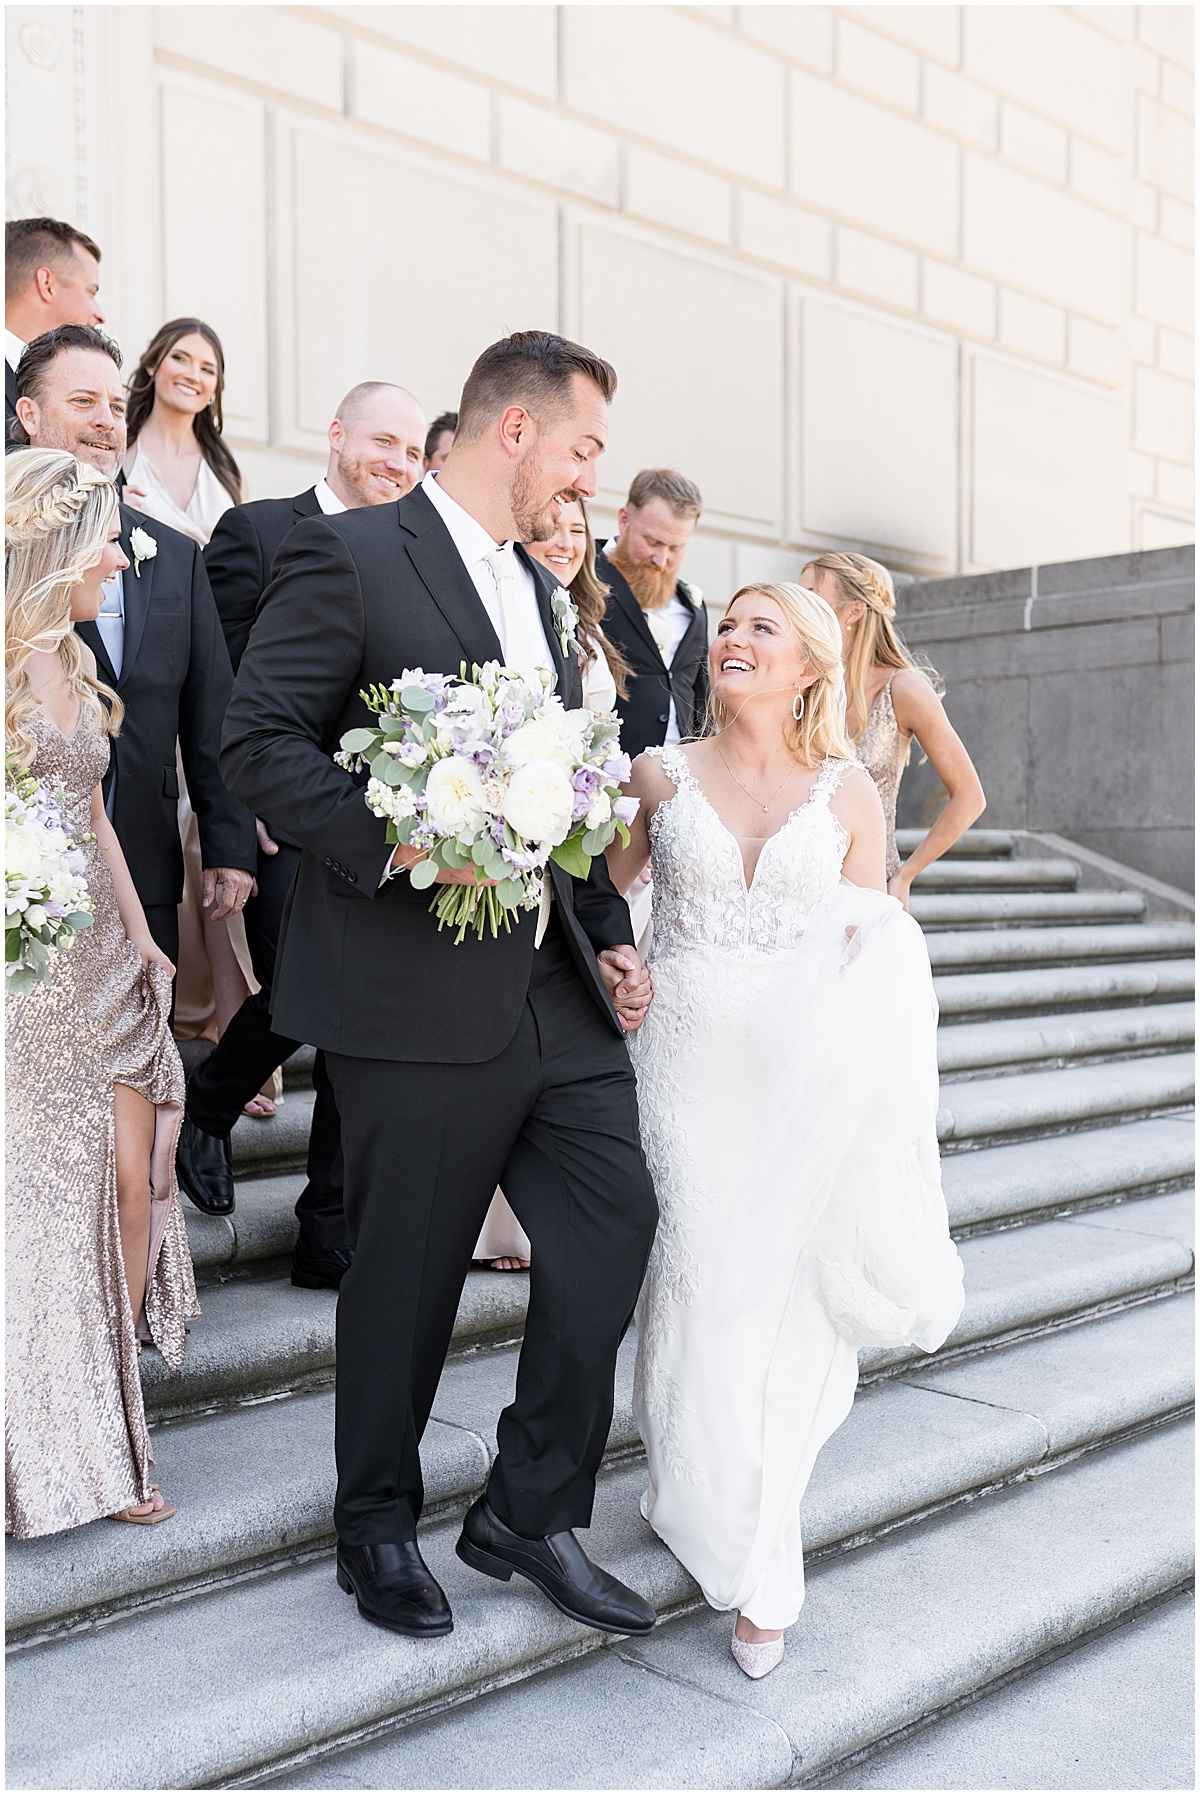 Bridal party walks down steps at Purdue Memorial Union wedding photographed by Victoria Rayburn Photography